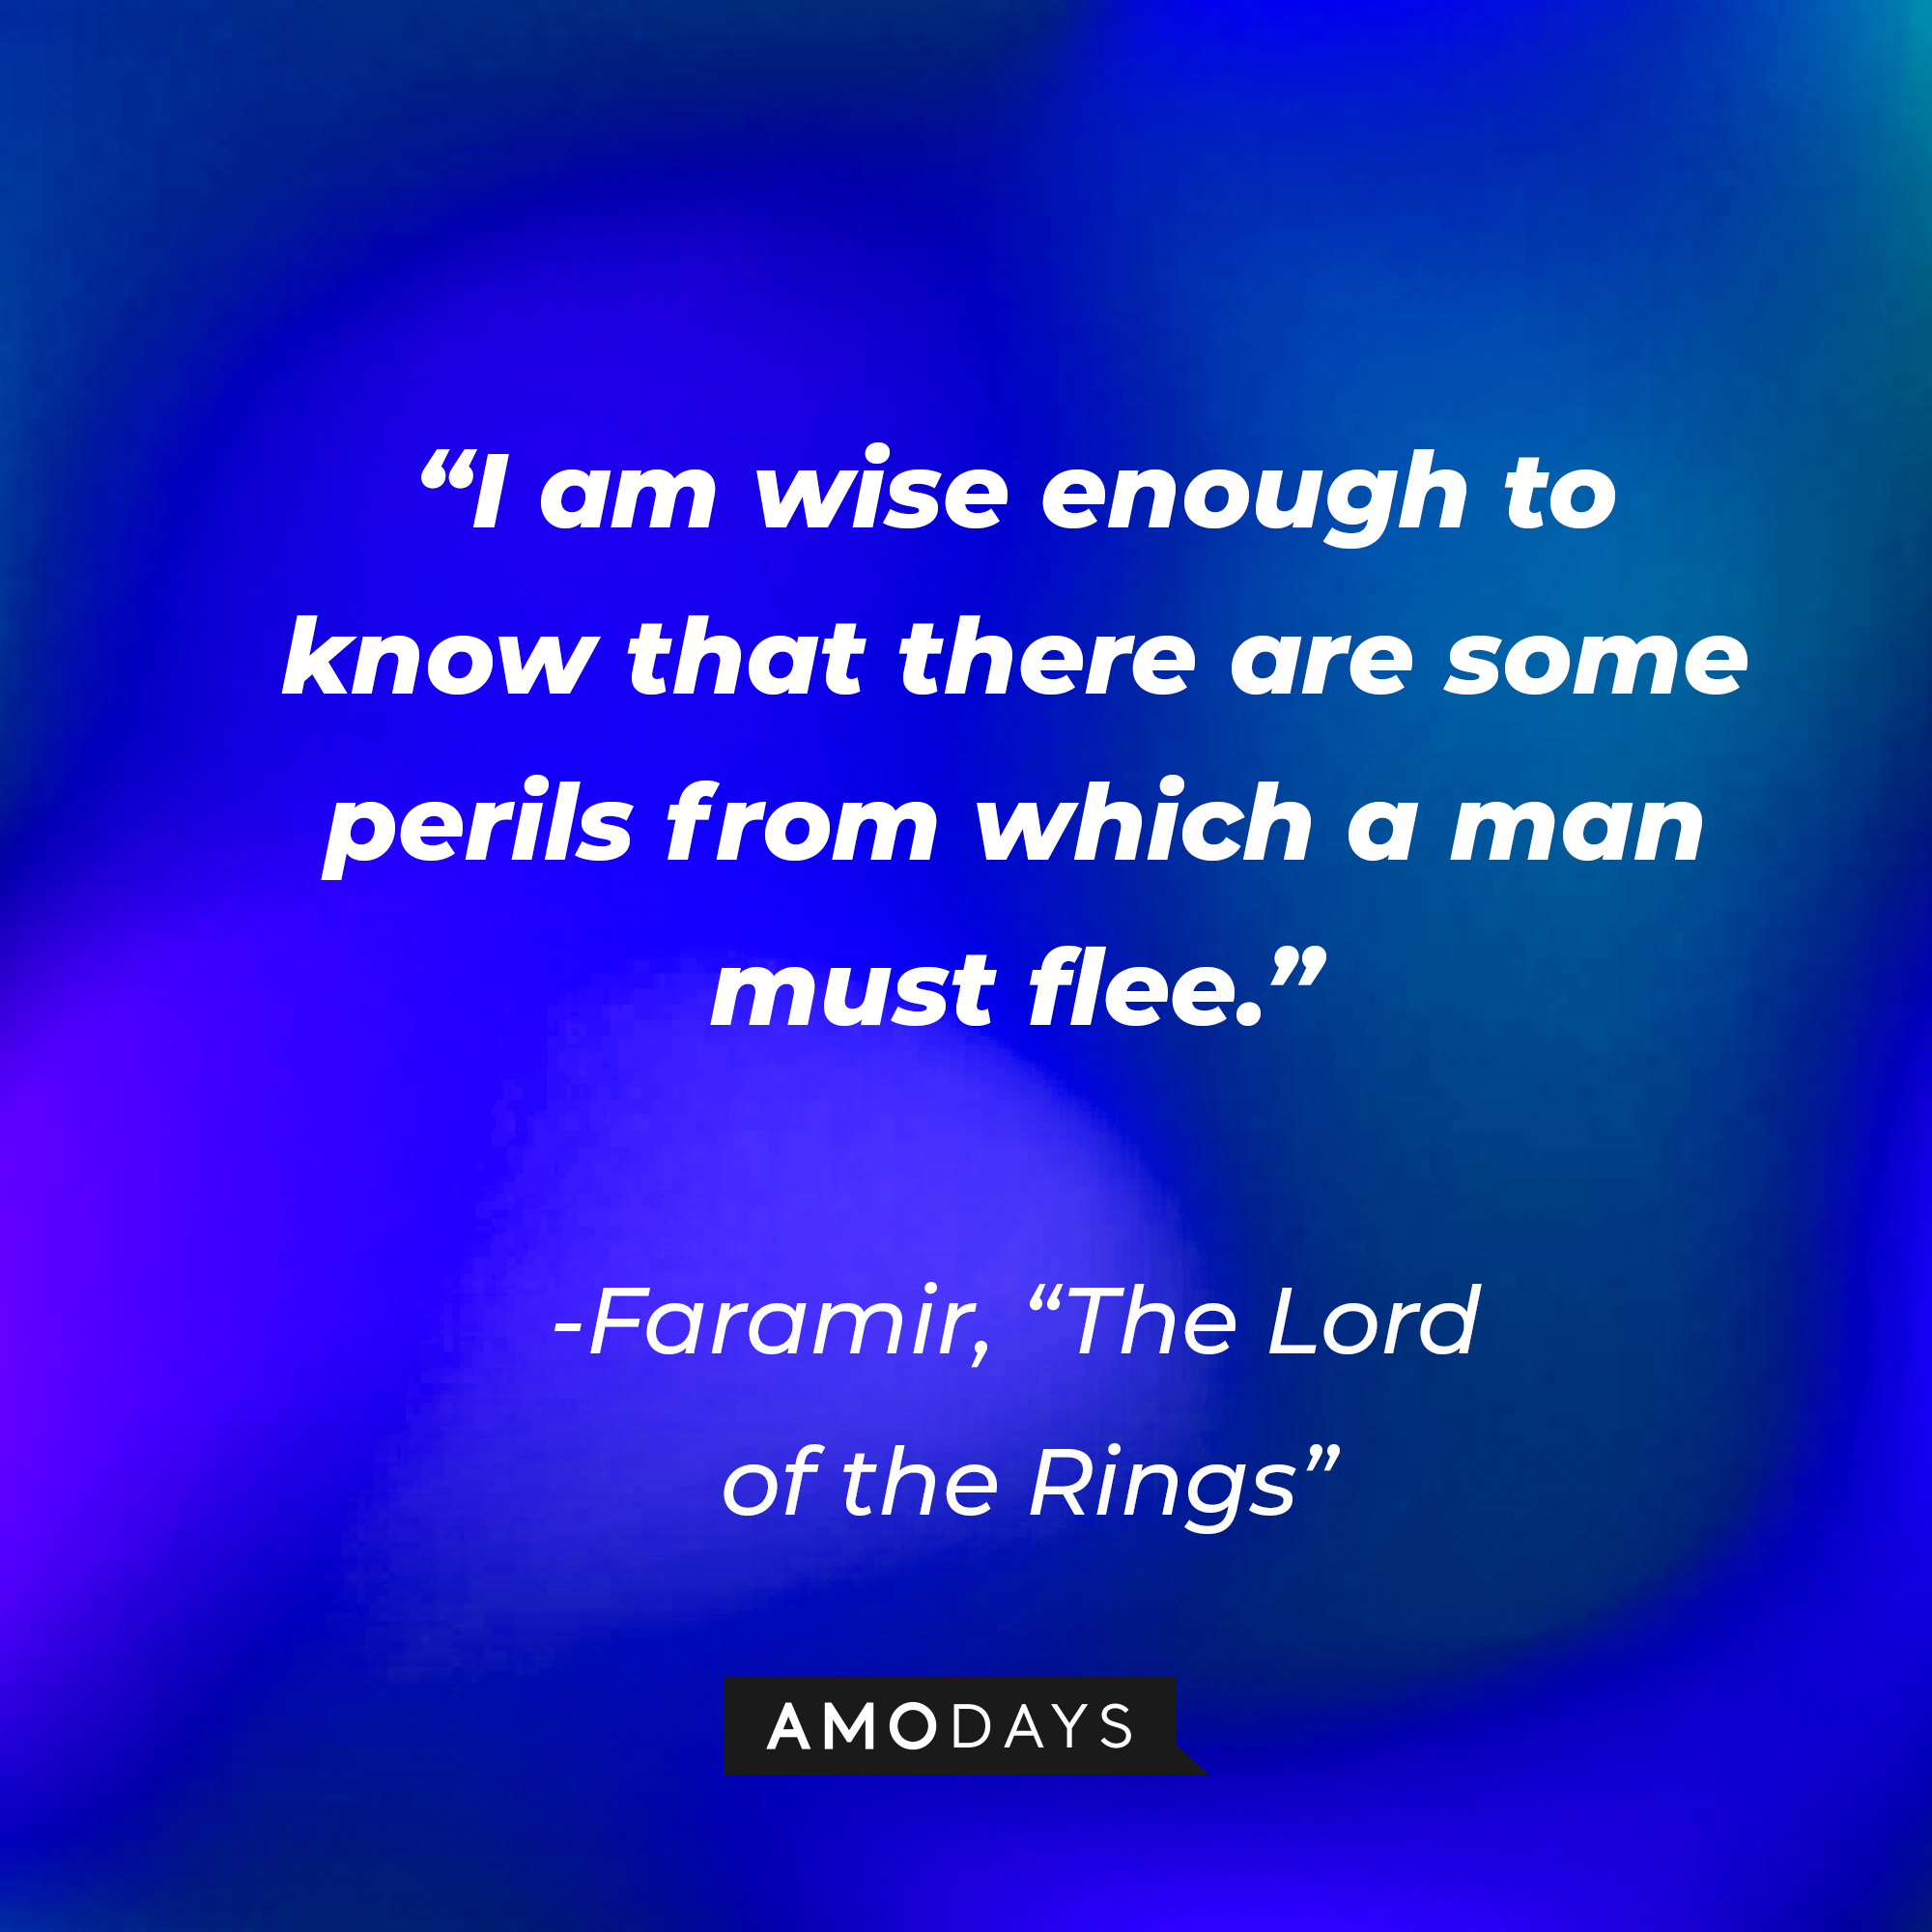 Faramir's quote from "The Lord of the Rings": "I am wise enough to know that there are some perils from which a man must flee." | Source: AmoDays